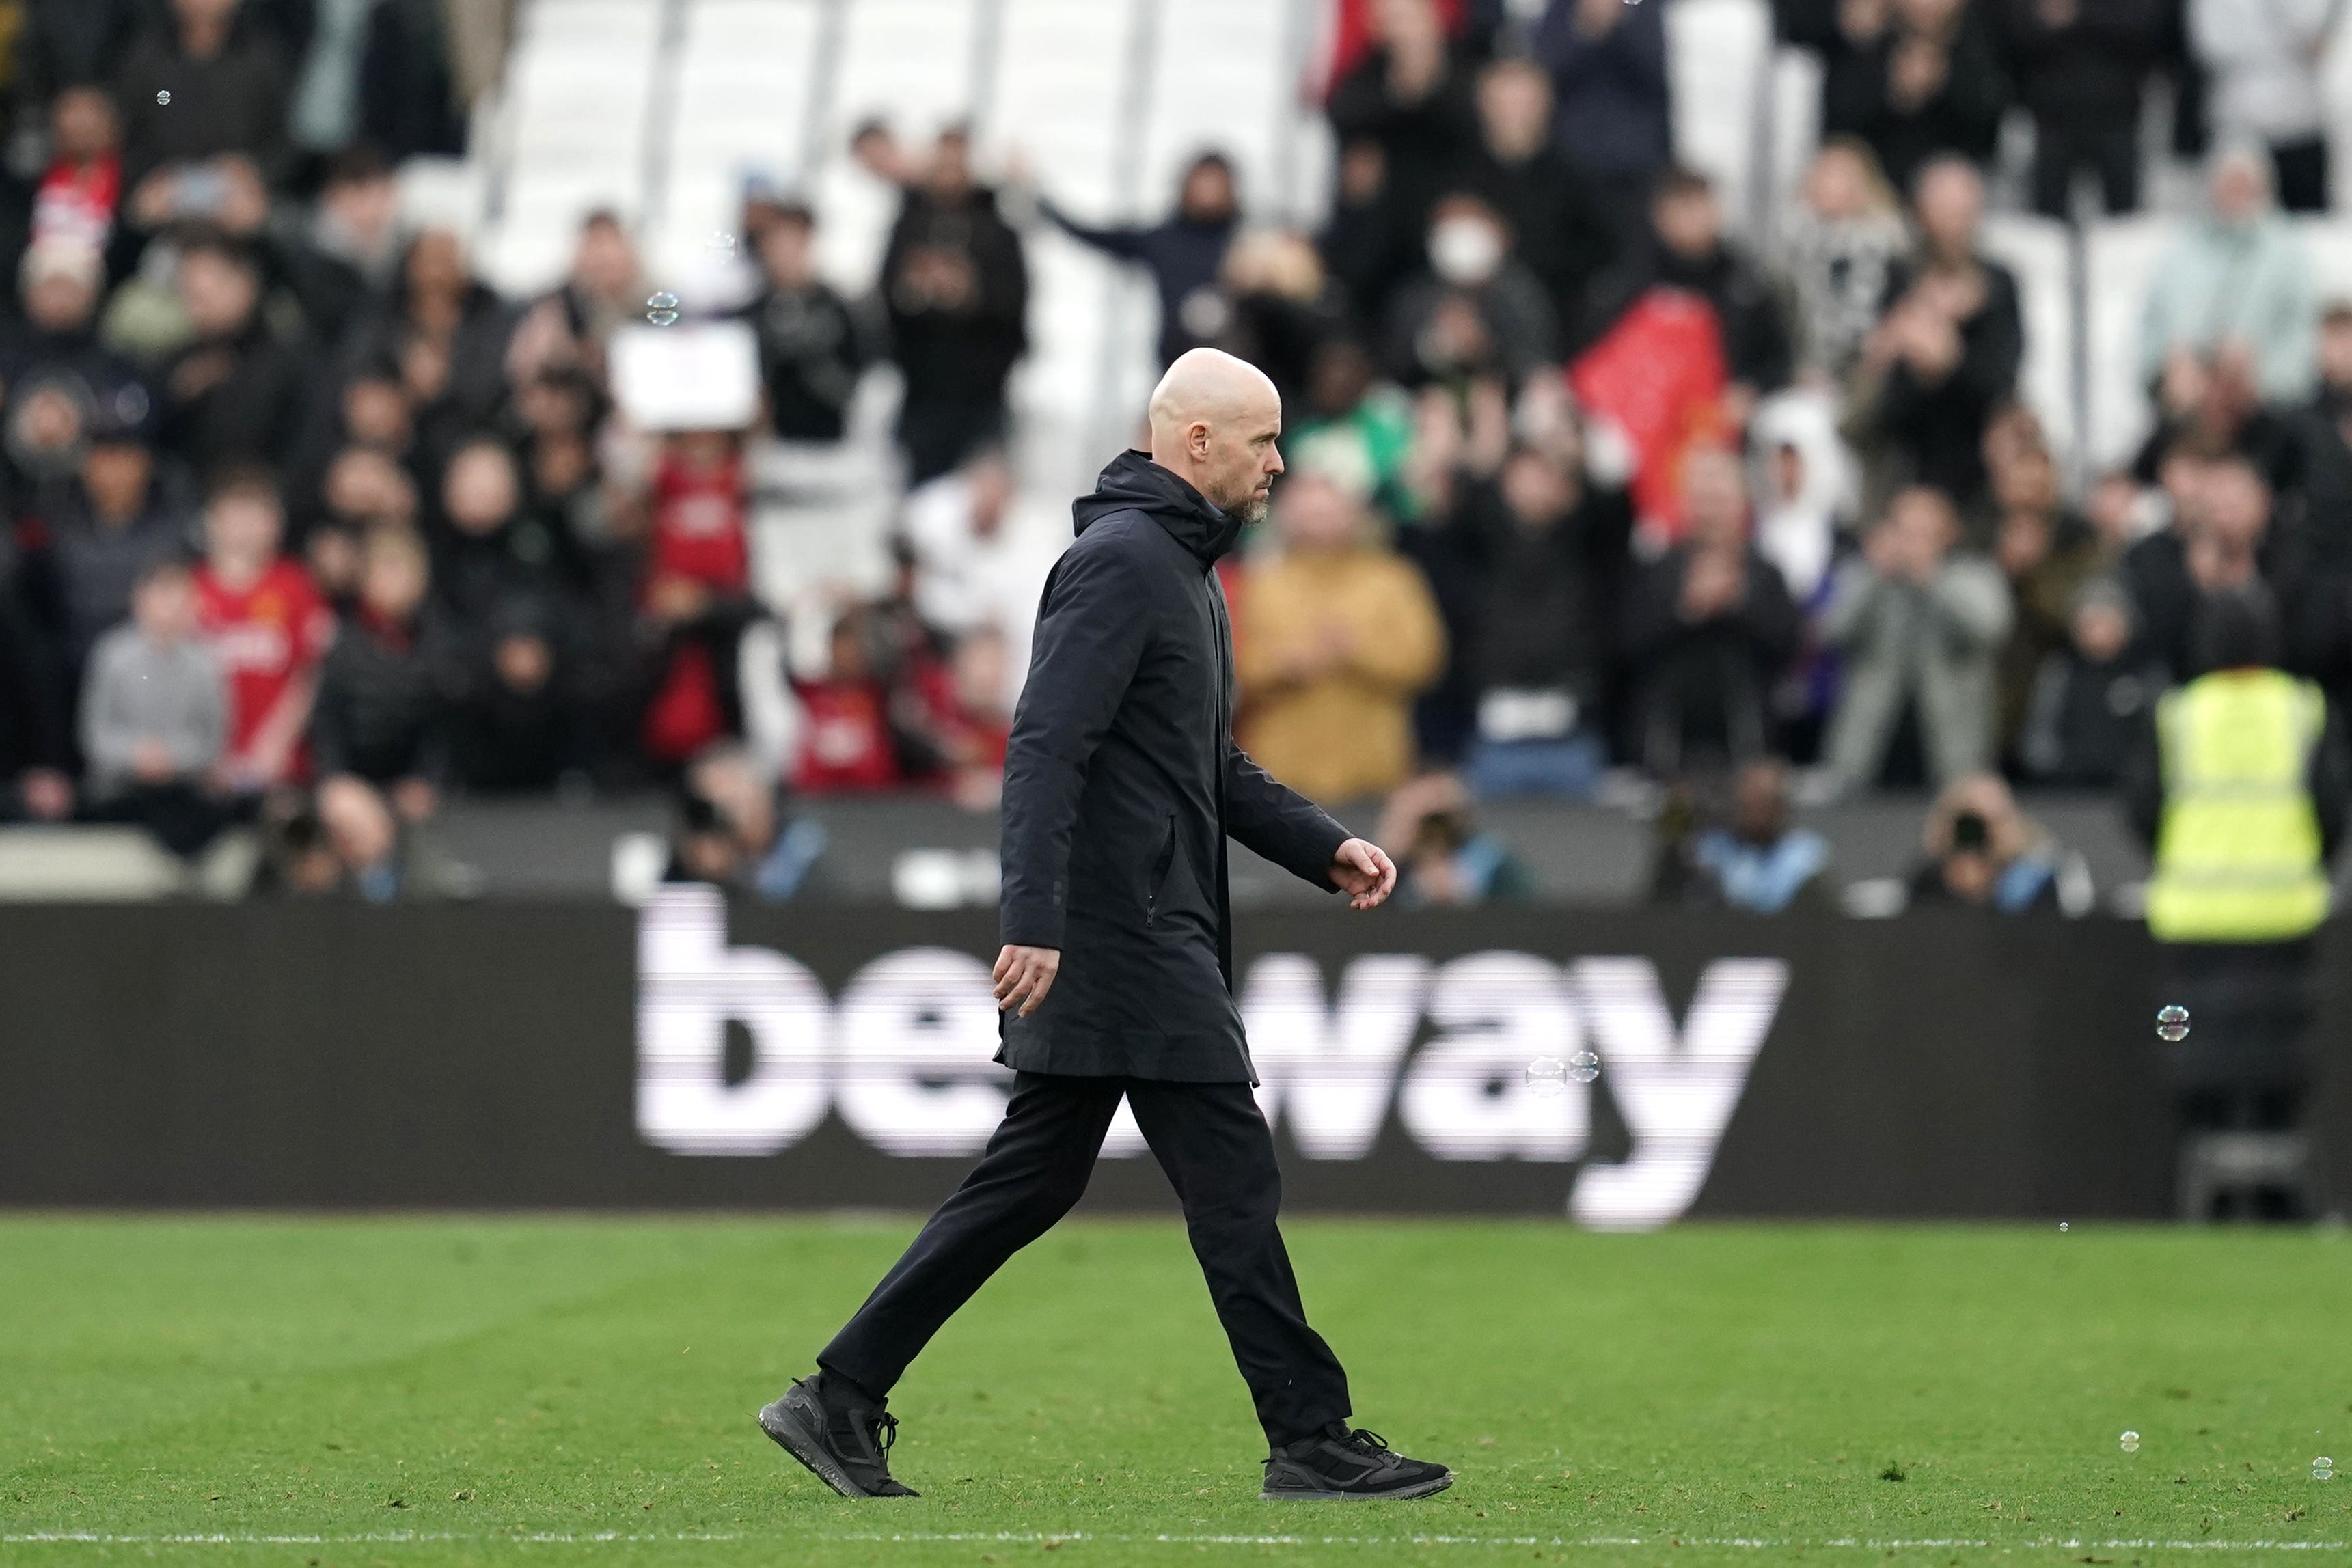 Erik ten Hag is under pressure as manager after a dismal season